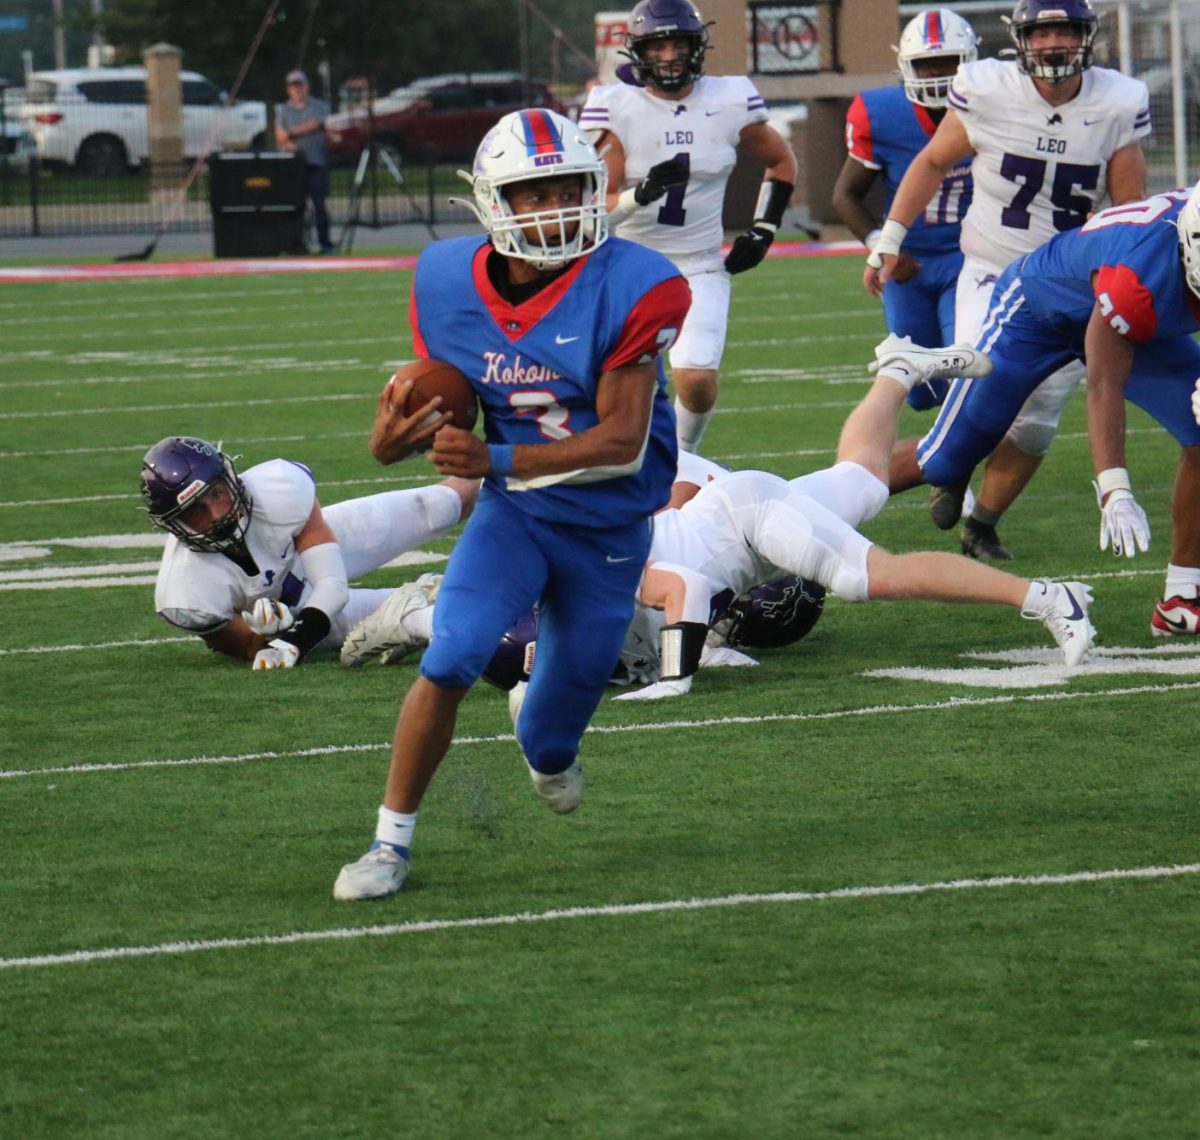 Senior quarterback Reis Beard moves the ball down the field. Beard led the Wildkats to a come from behind victory over Leo.